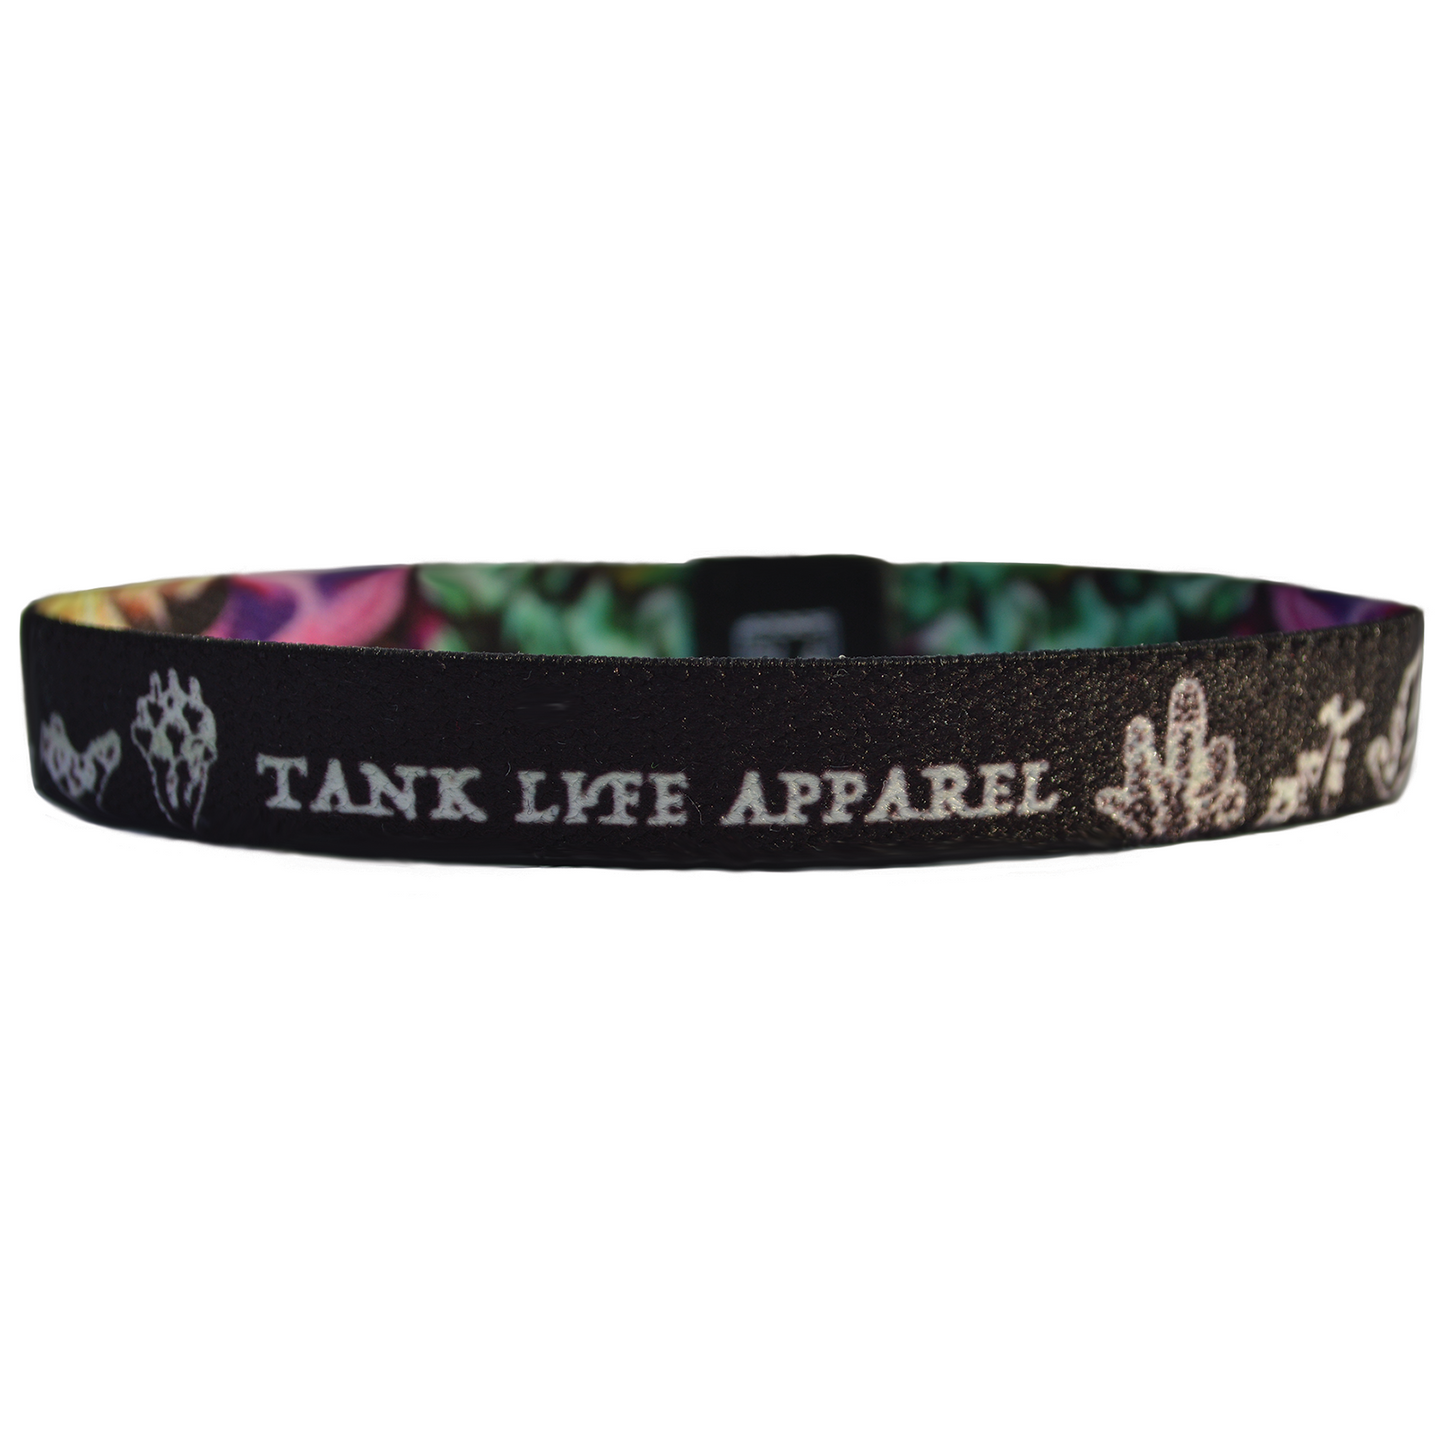 Corals reef bracelet wristband by tank life apparel. White coral design on one side with colorful reef on the other side. Reefer bracelet wristband.